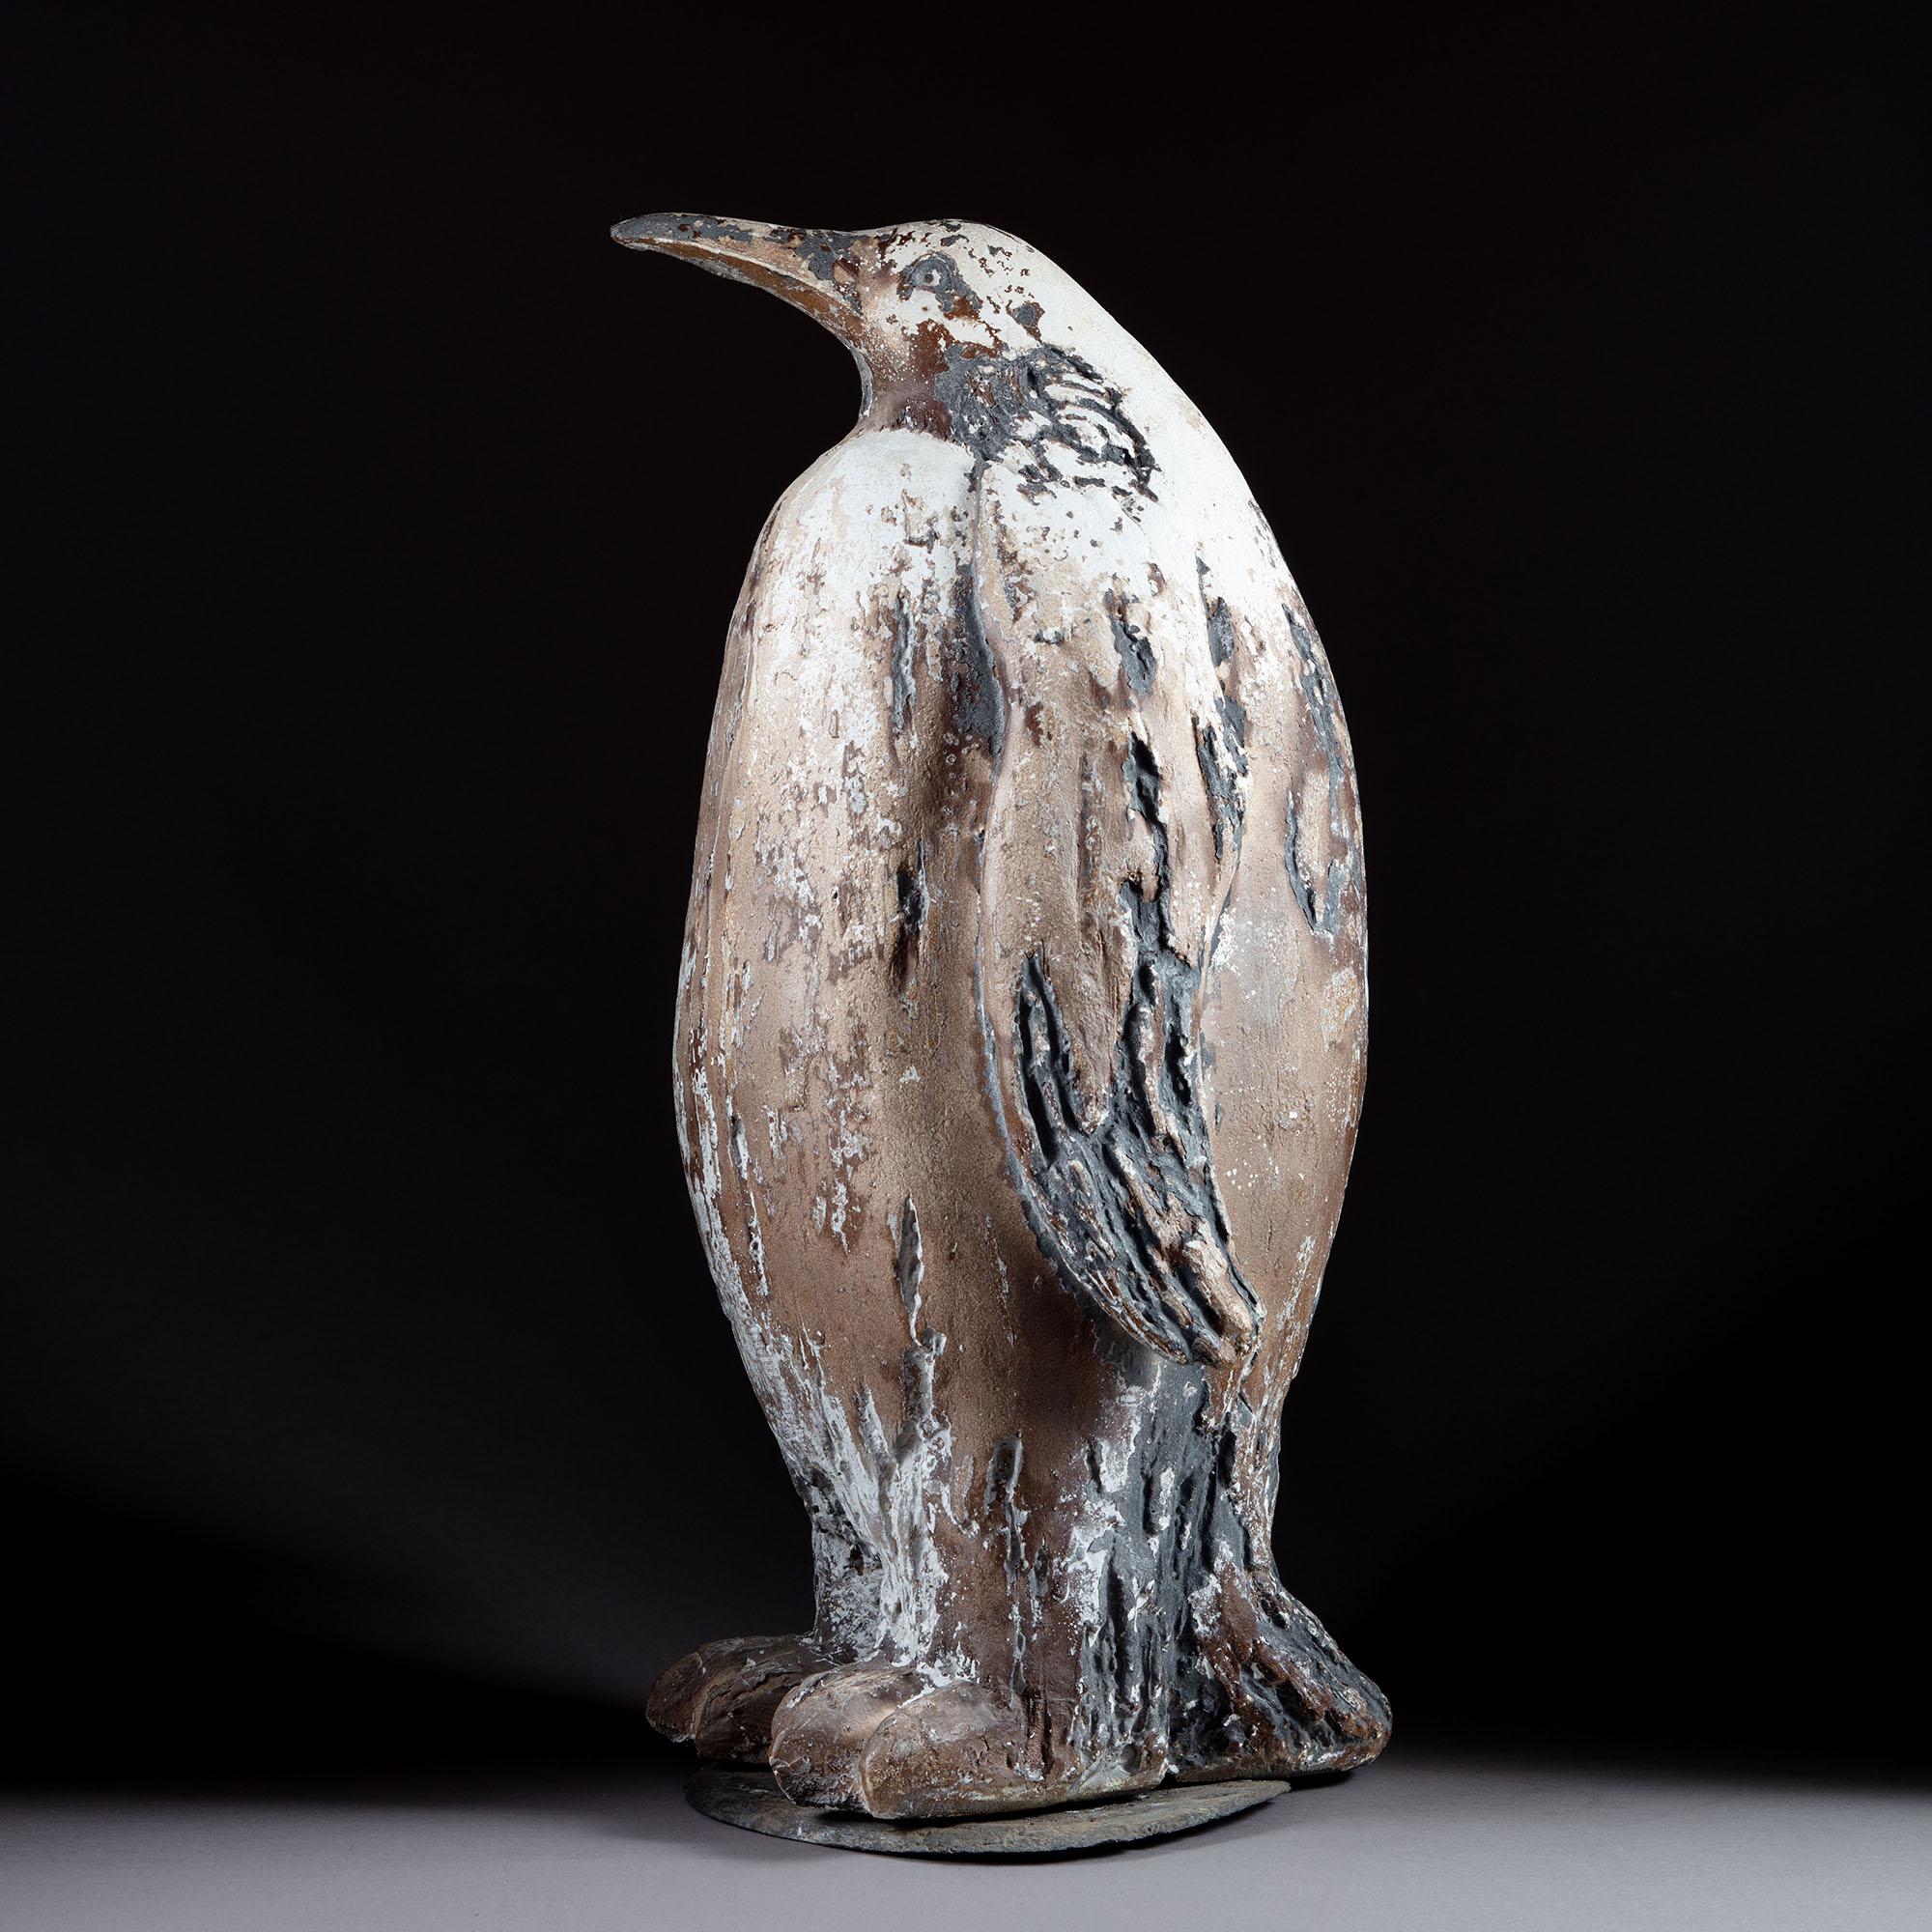 An unusual plaster sculpture of an emperor penguin with paint residue, standing on a slate base.